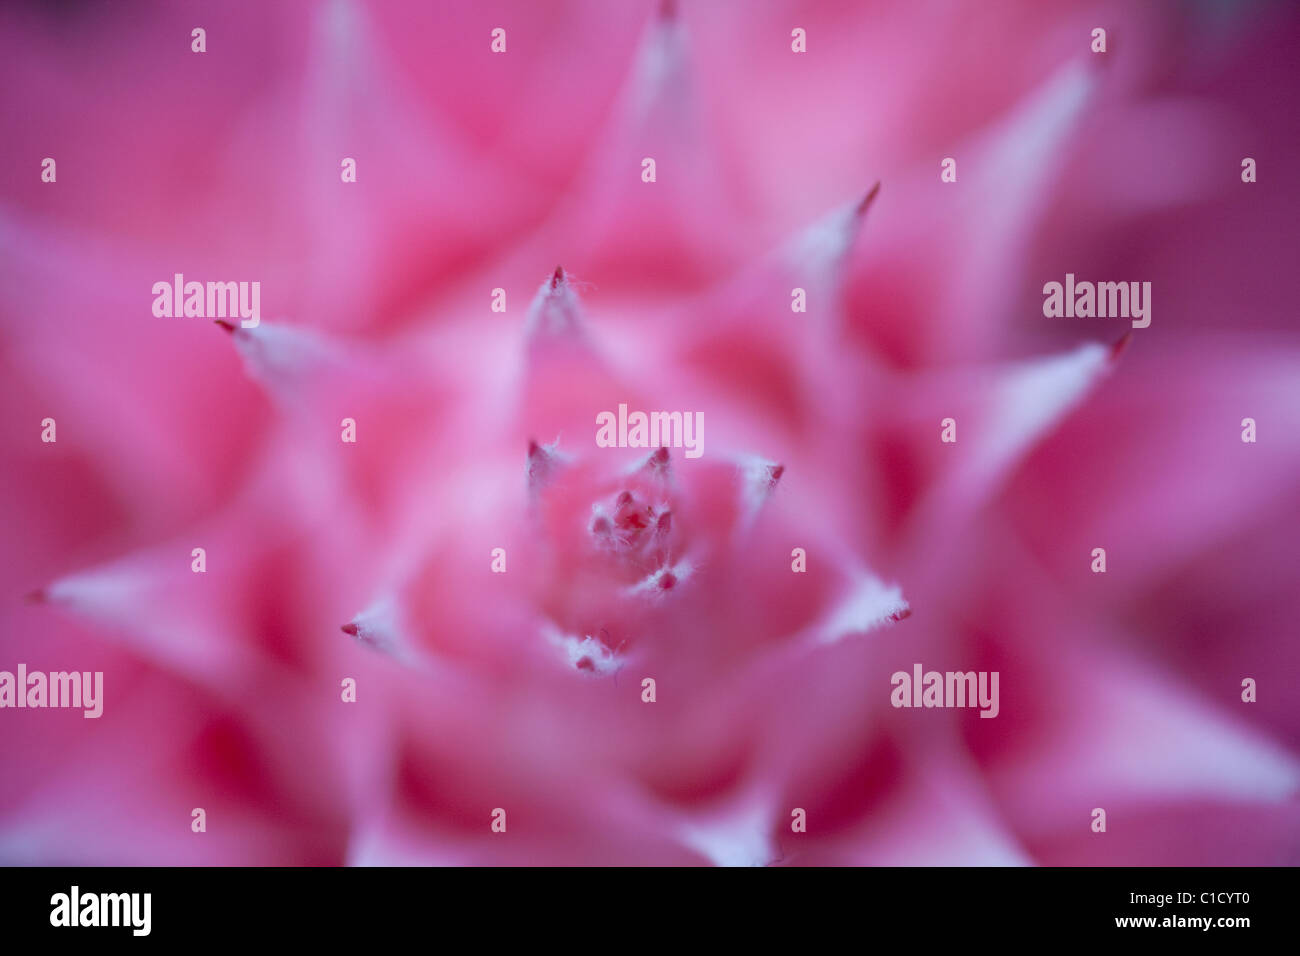 Abstract Macro of a Pink Bromeliad Flower Stock Photo